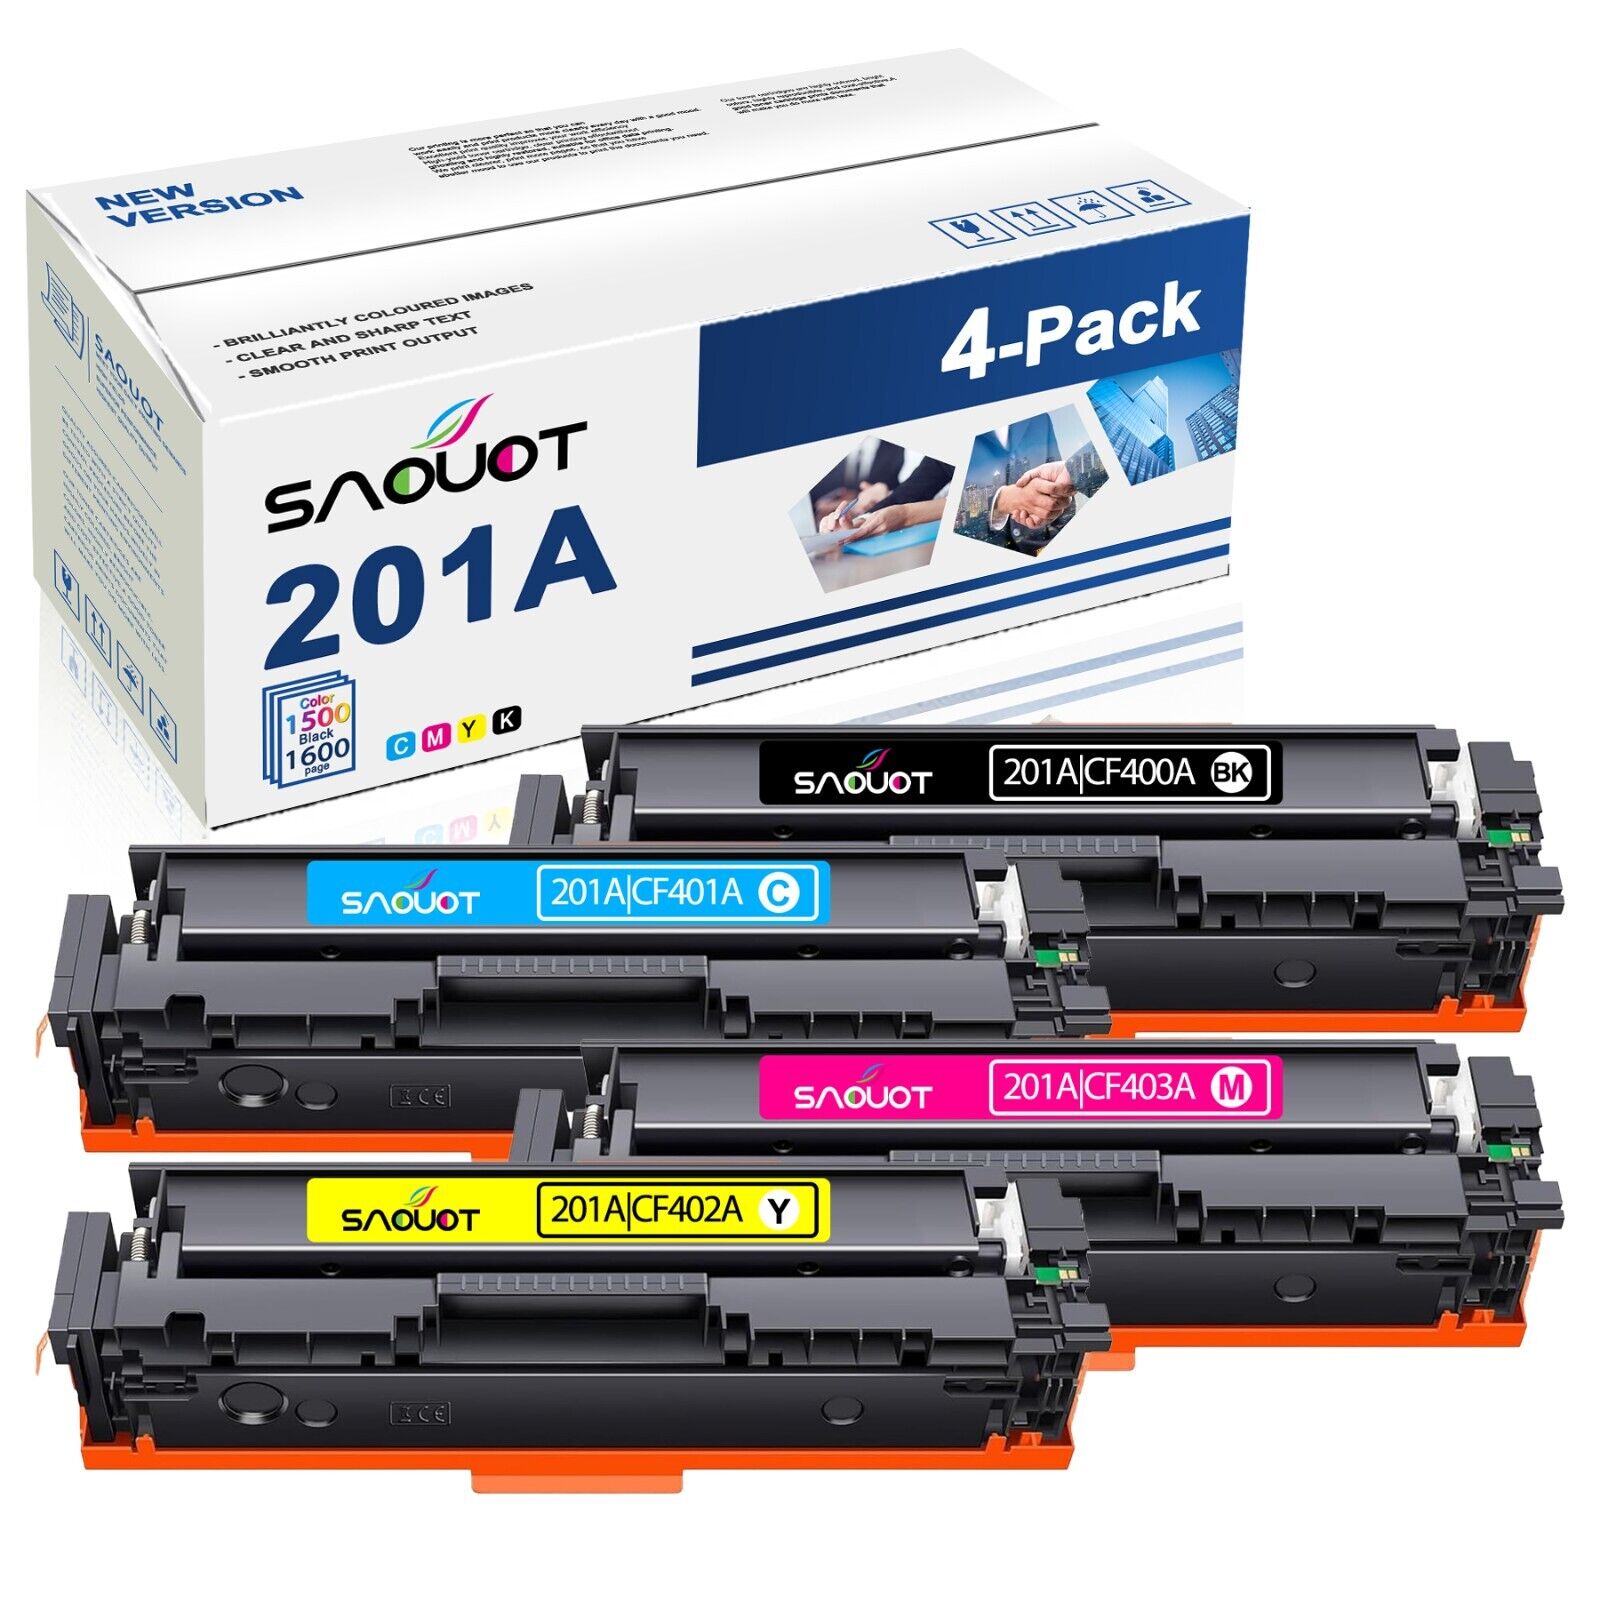 201A Toner Cartridge Replacement for HP 201A 201X CF400A MFP M277c6, KCMY